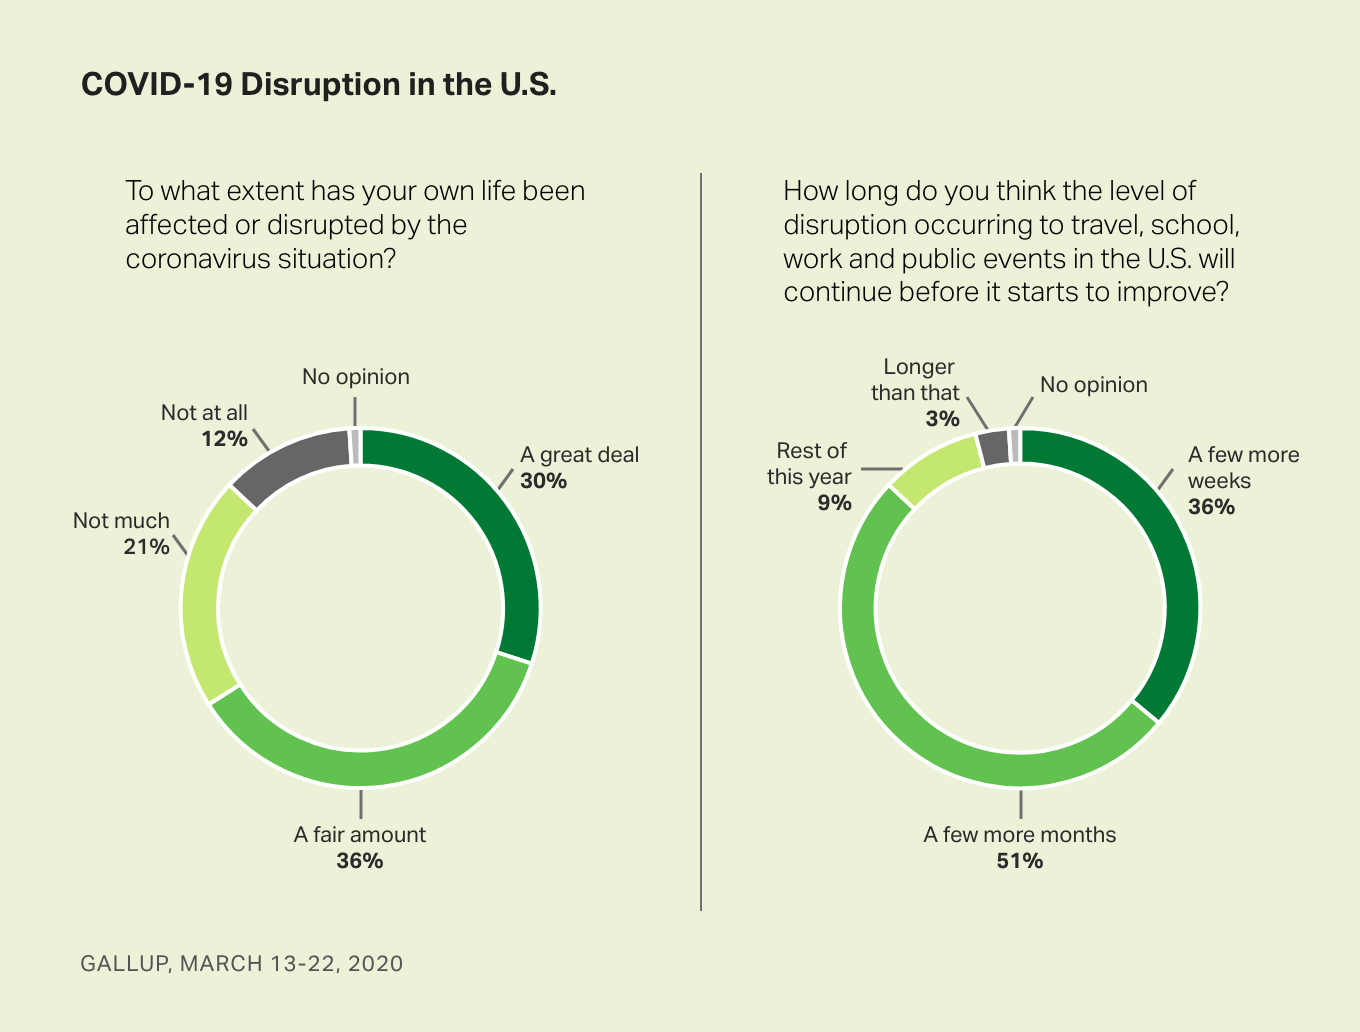 Donut charts. Americans’ views of the degree of disruption in their lives from COVID-19 and how long they expect they’ll last.